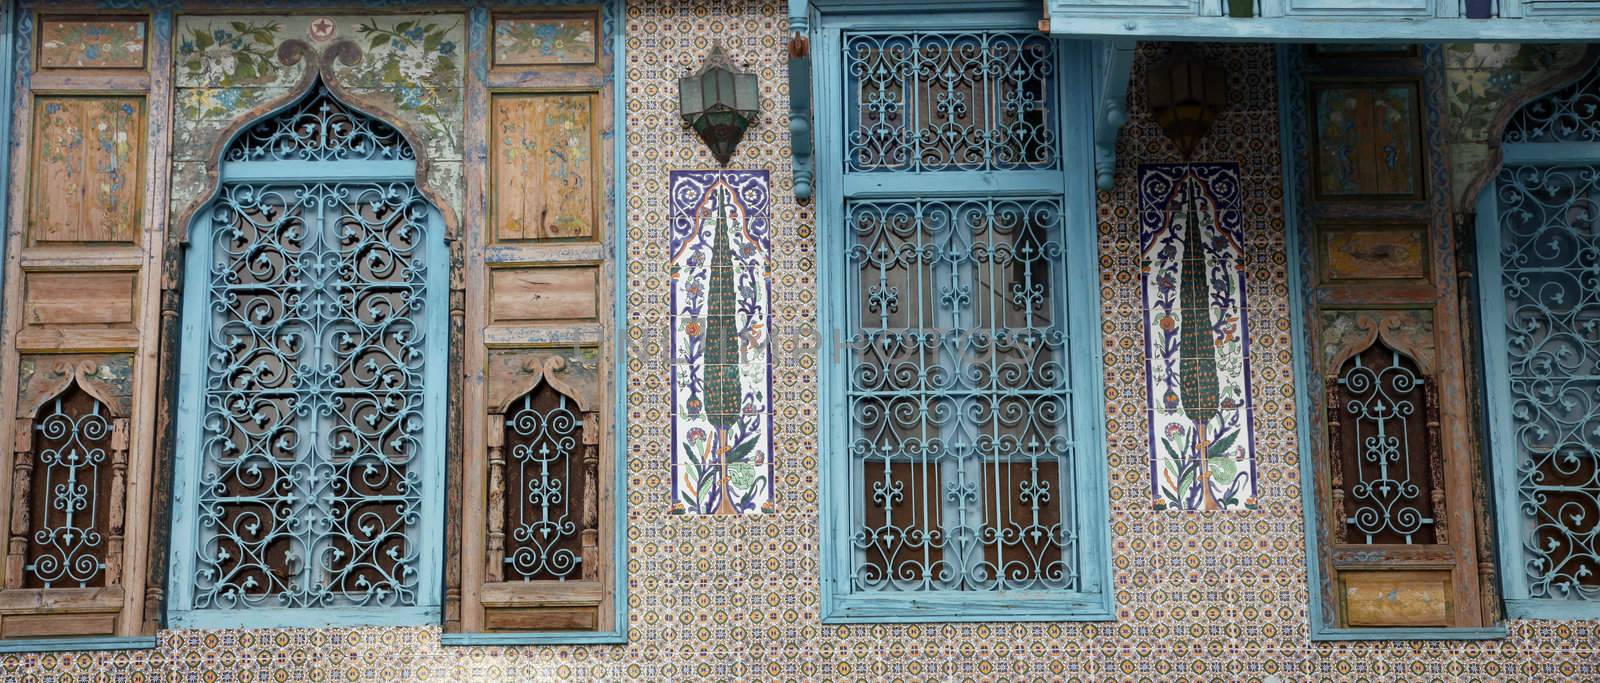 Old Tunisian window with classical Arab ornaments